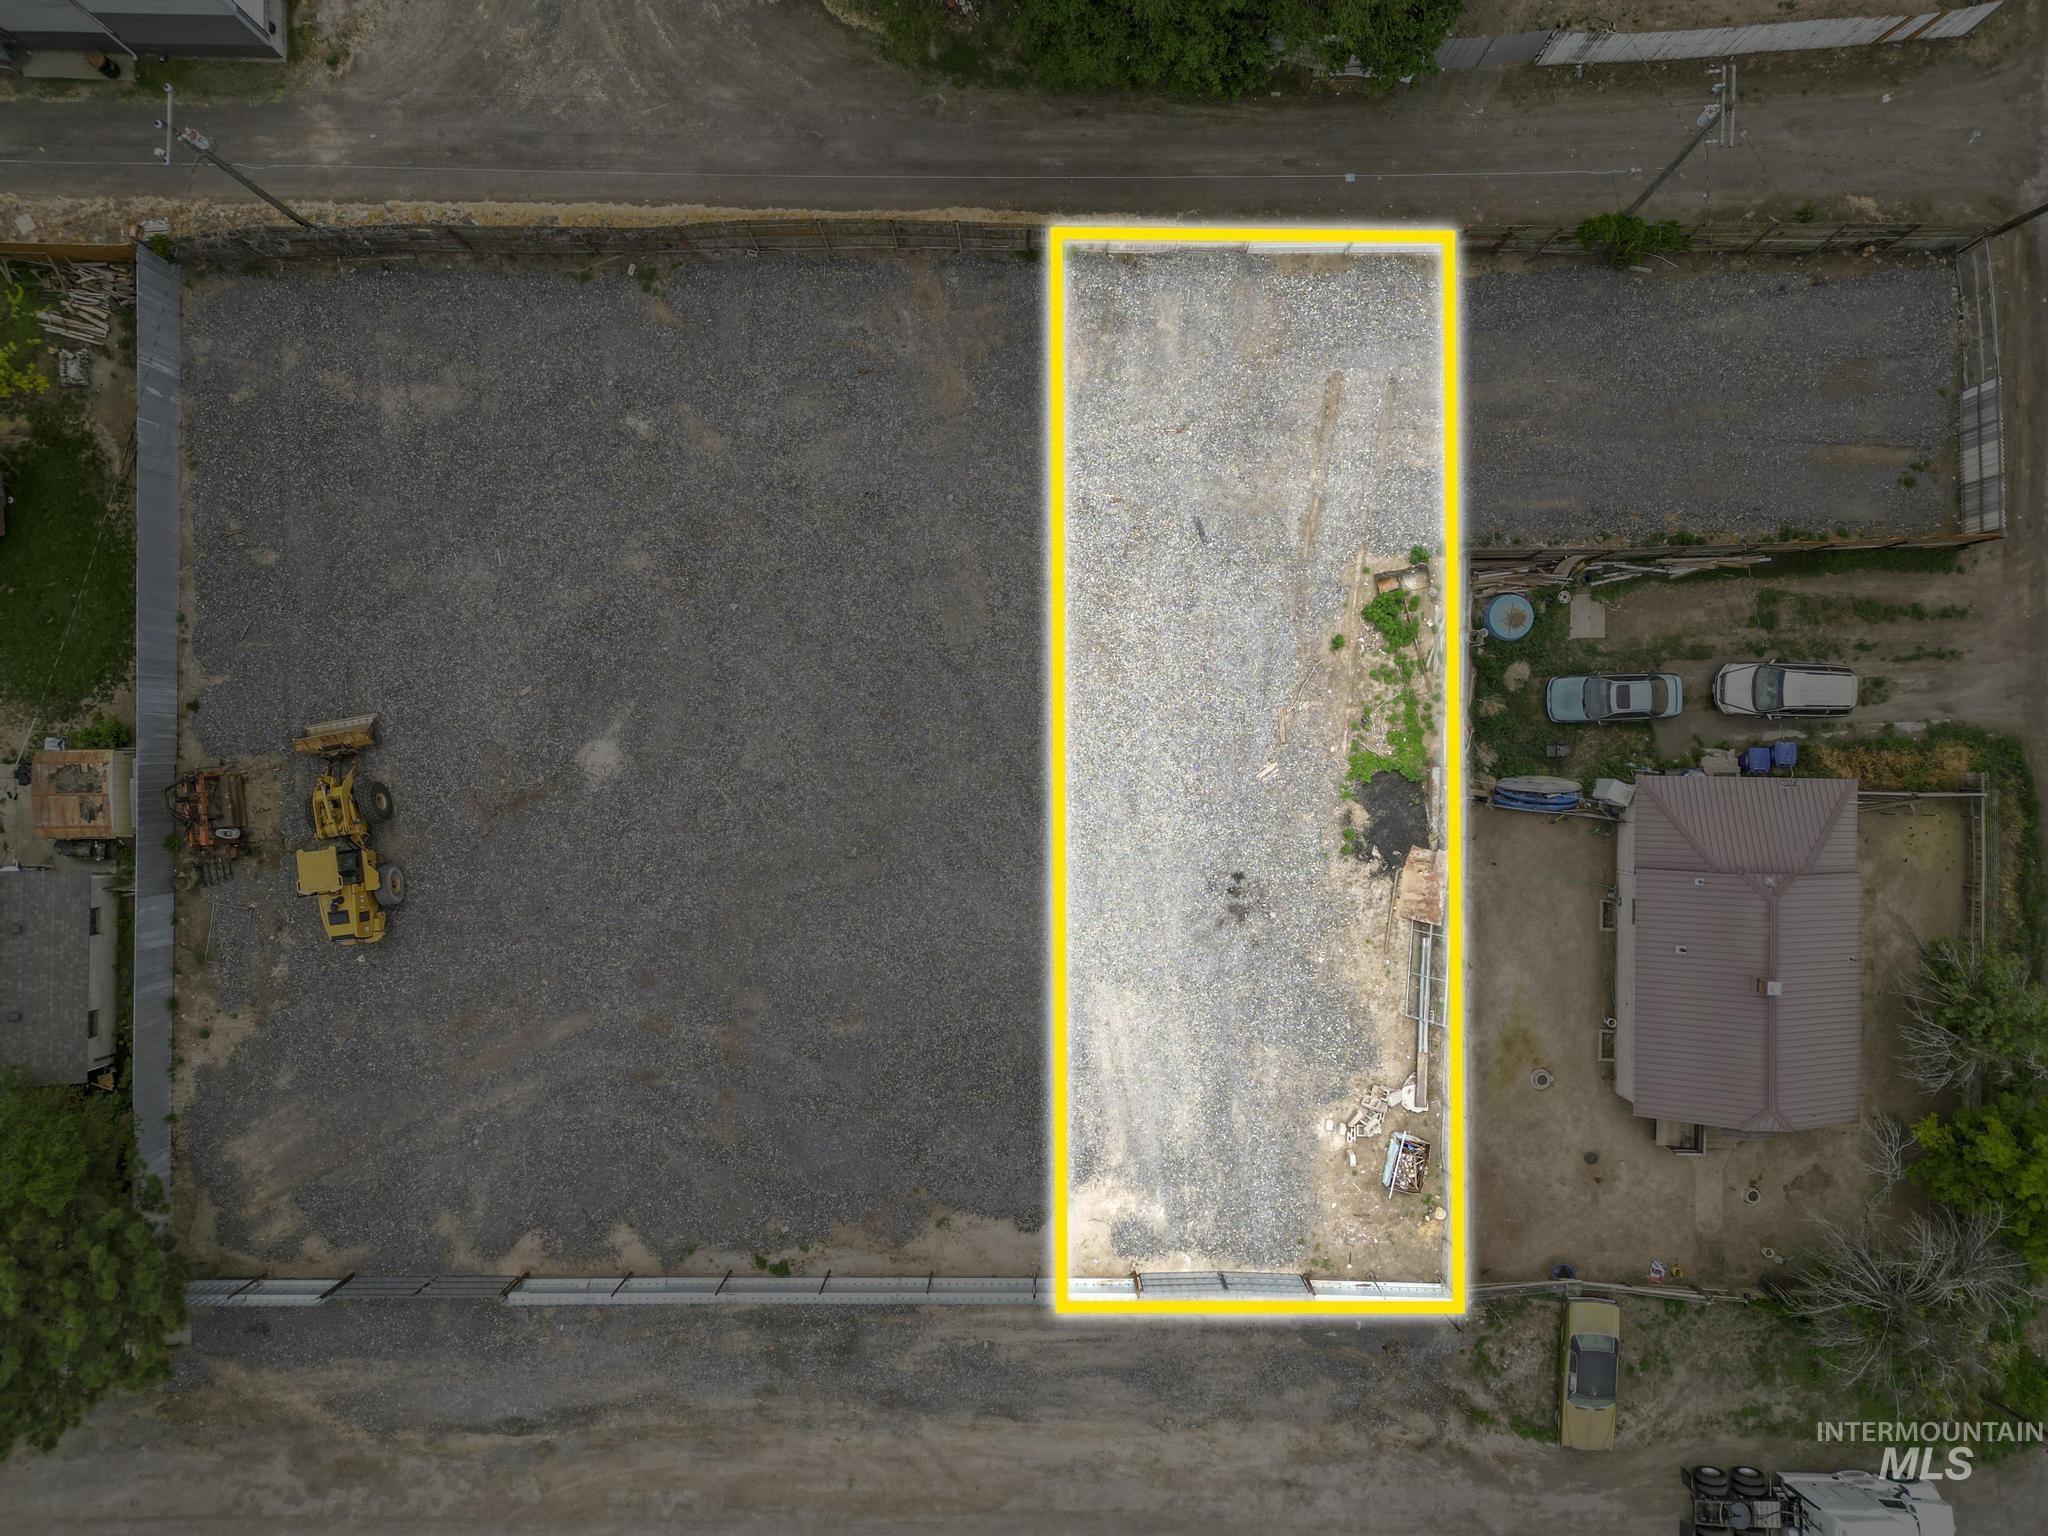 TBD 130 W Ave C (Lots 5, 6, 7 & 16-20), Jerome, Idaho 83338, Land For Sale, Price $400,000,MLS 98882675